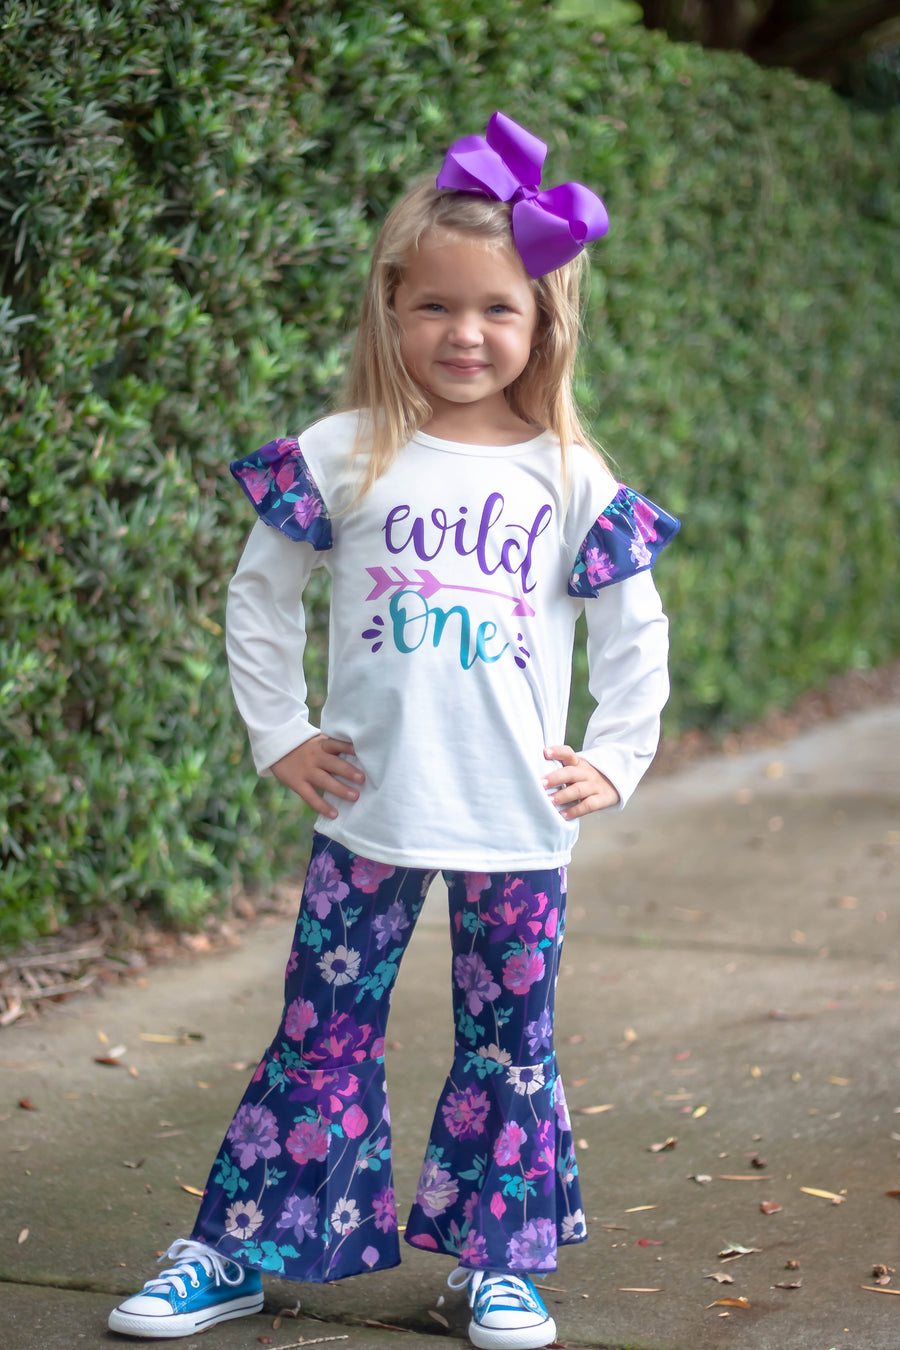 "Wild One" Boutique Outfit - Rylee Faith Designs